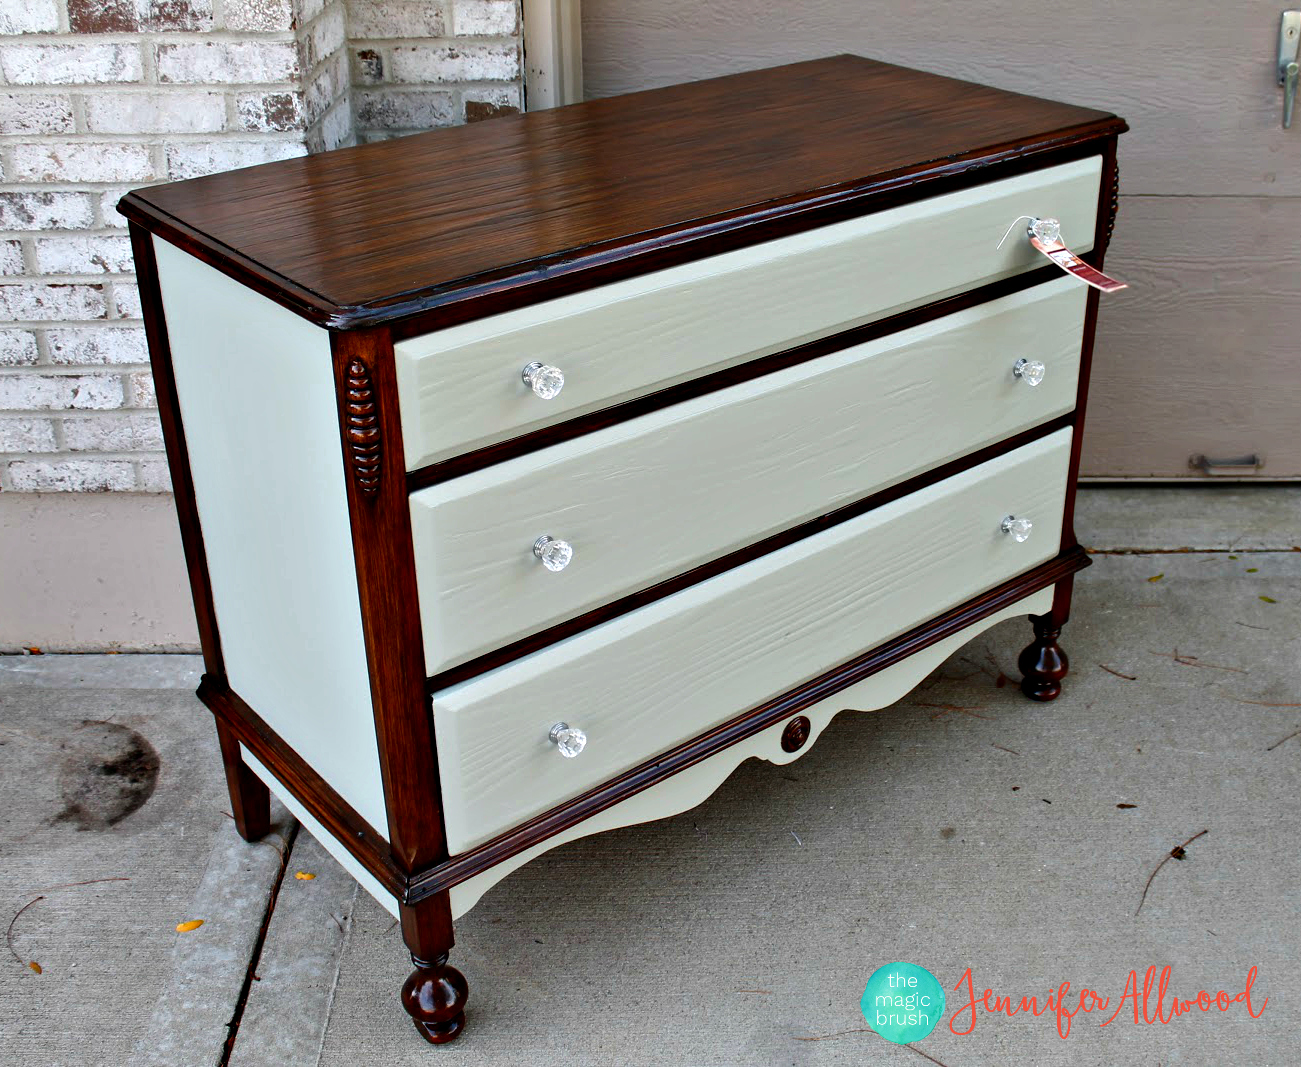 Painted andStained Furniture Jennifer Allwood